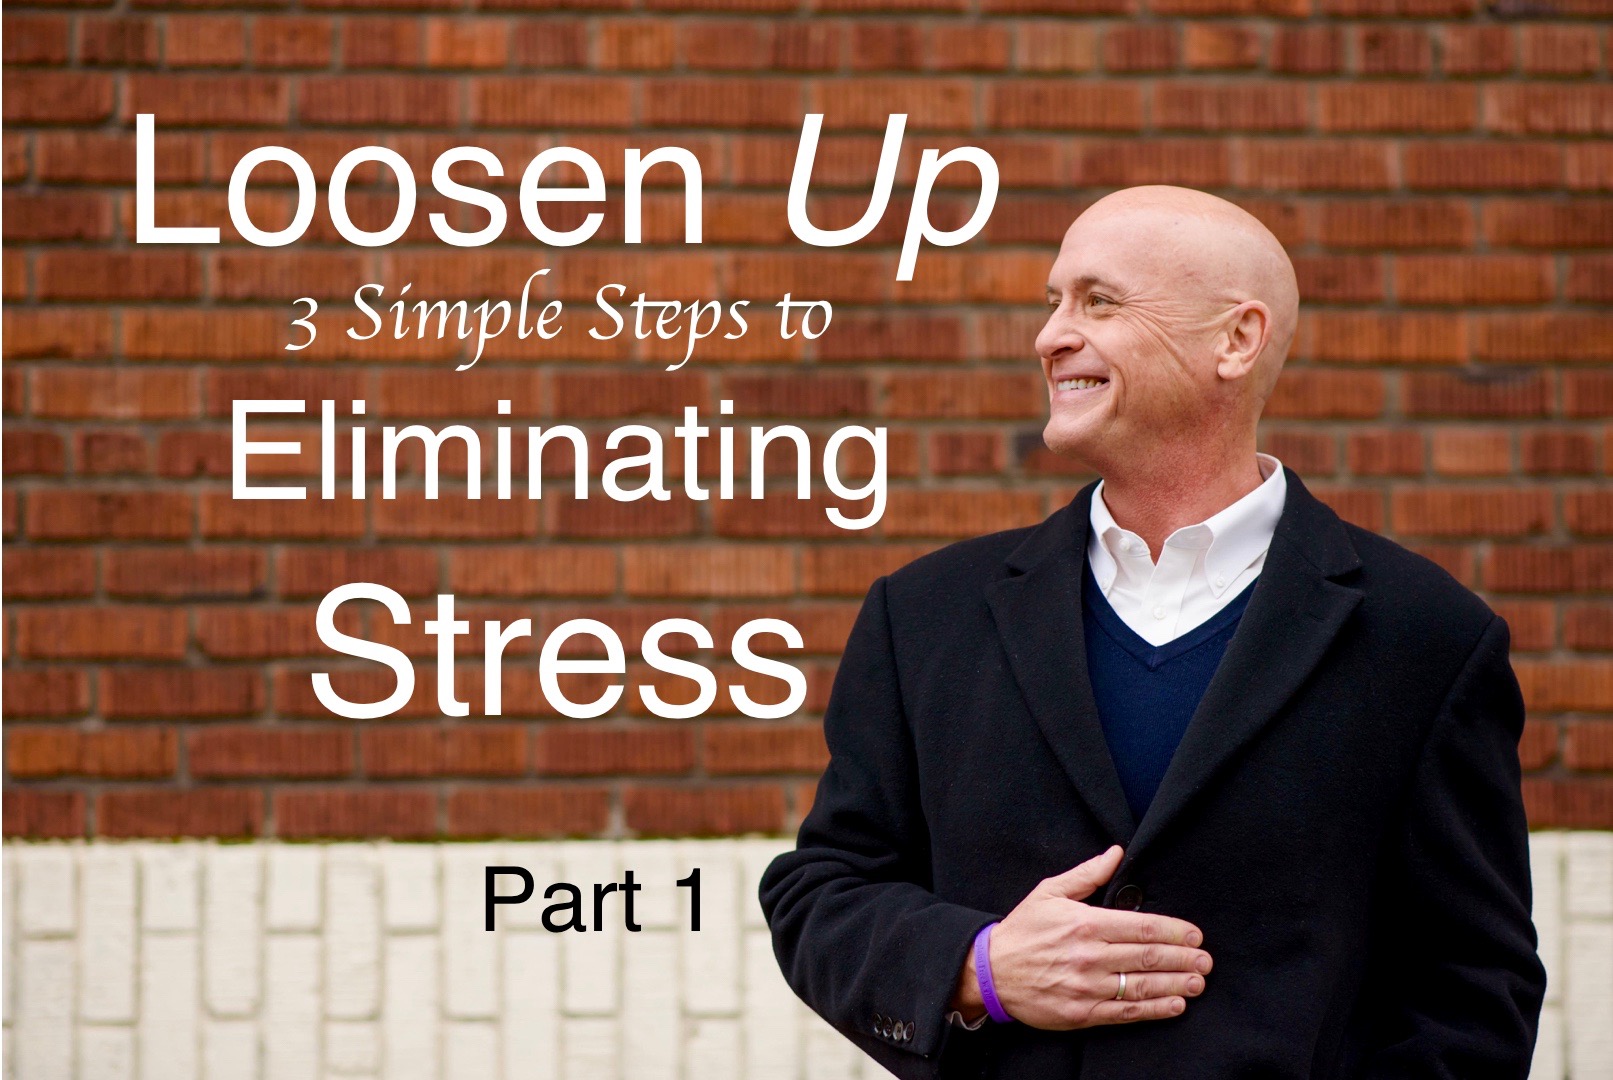 Loosen Up - 3 Simple Steps to Eliminating Stress (Part 1)